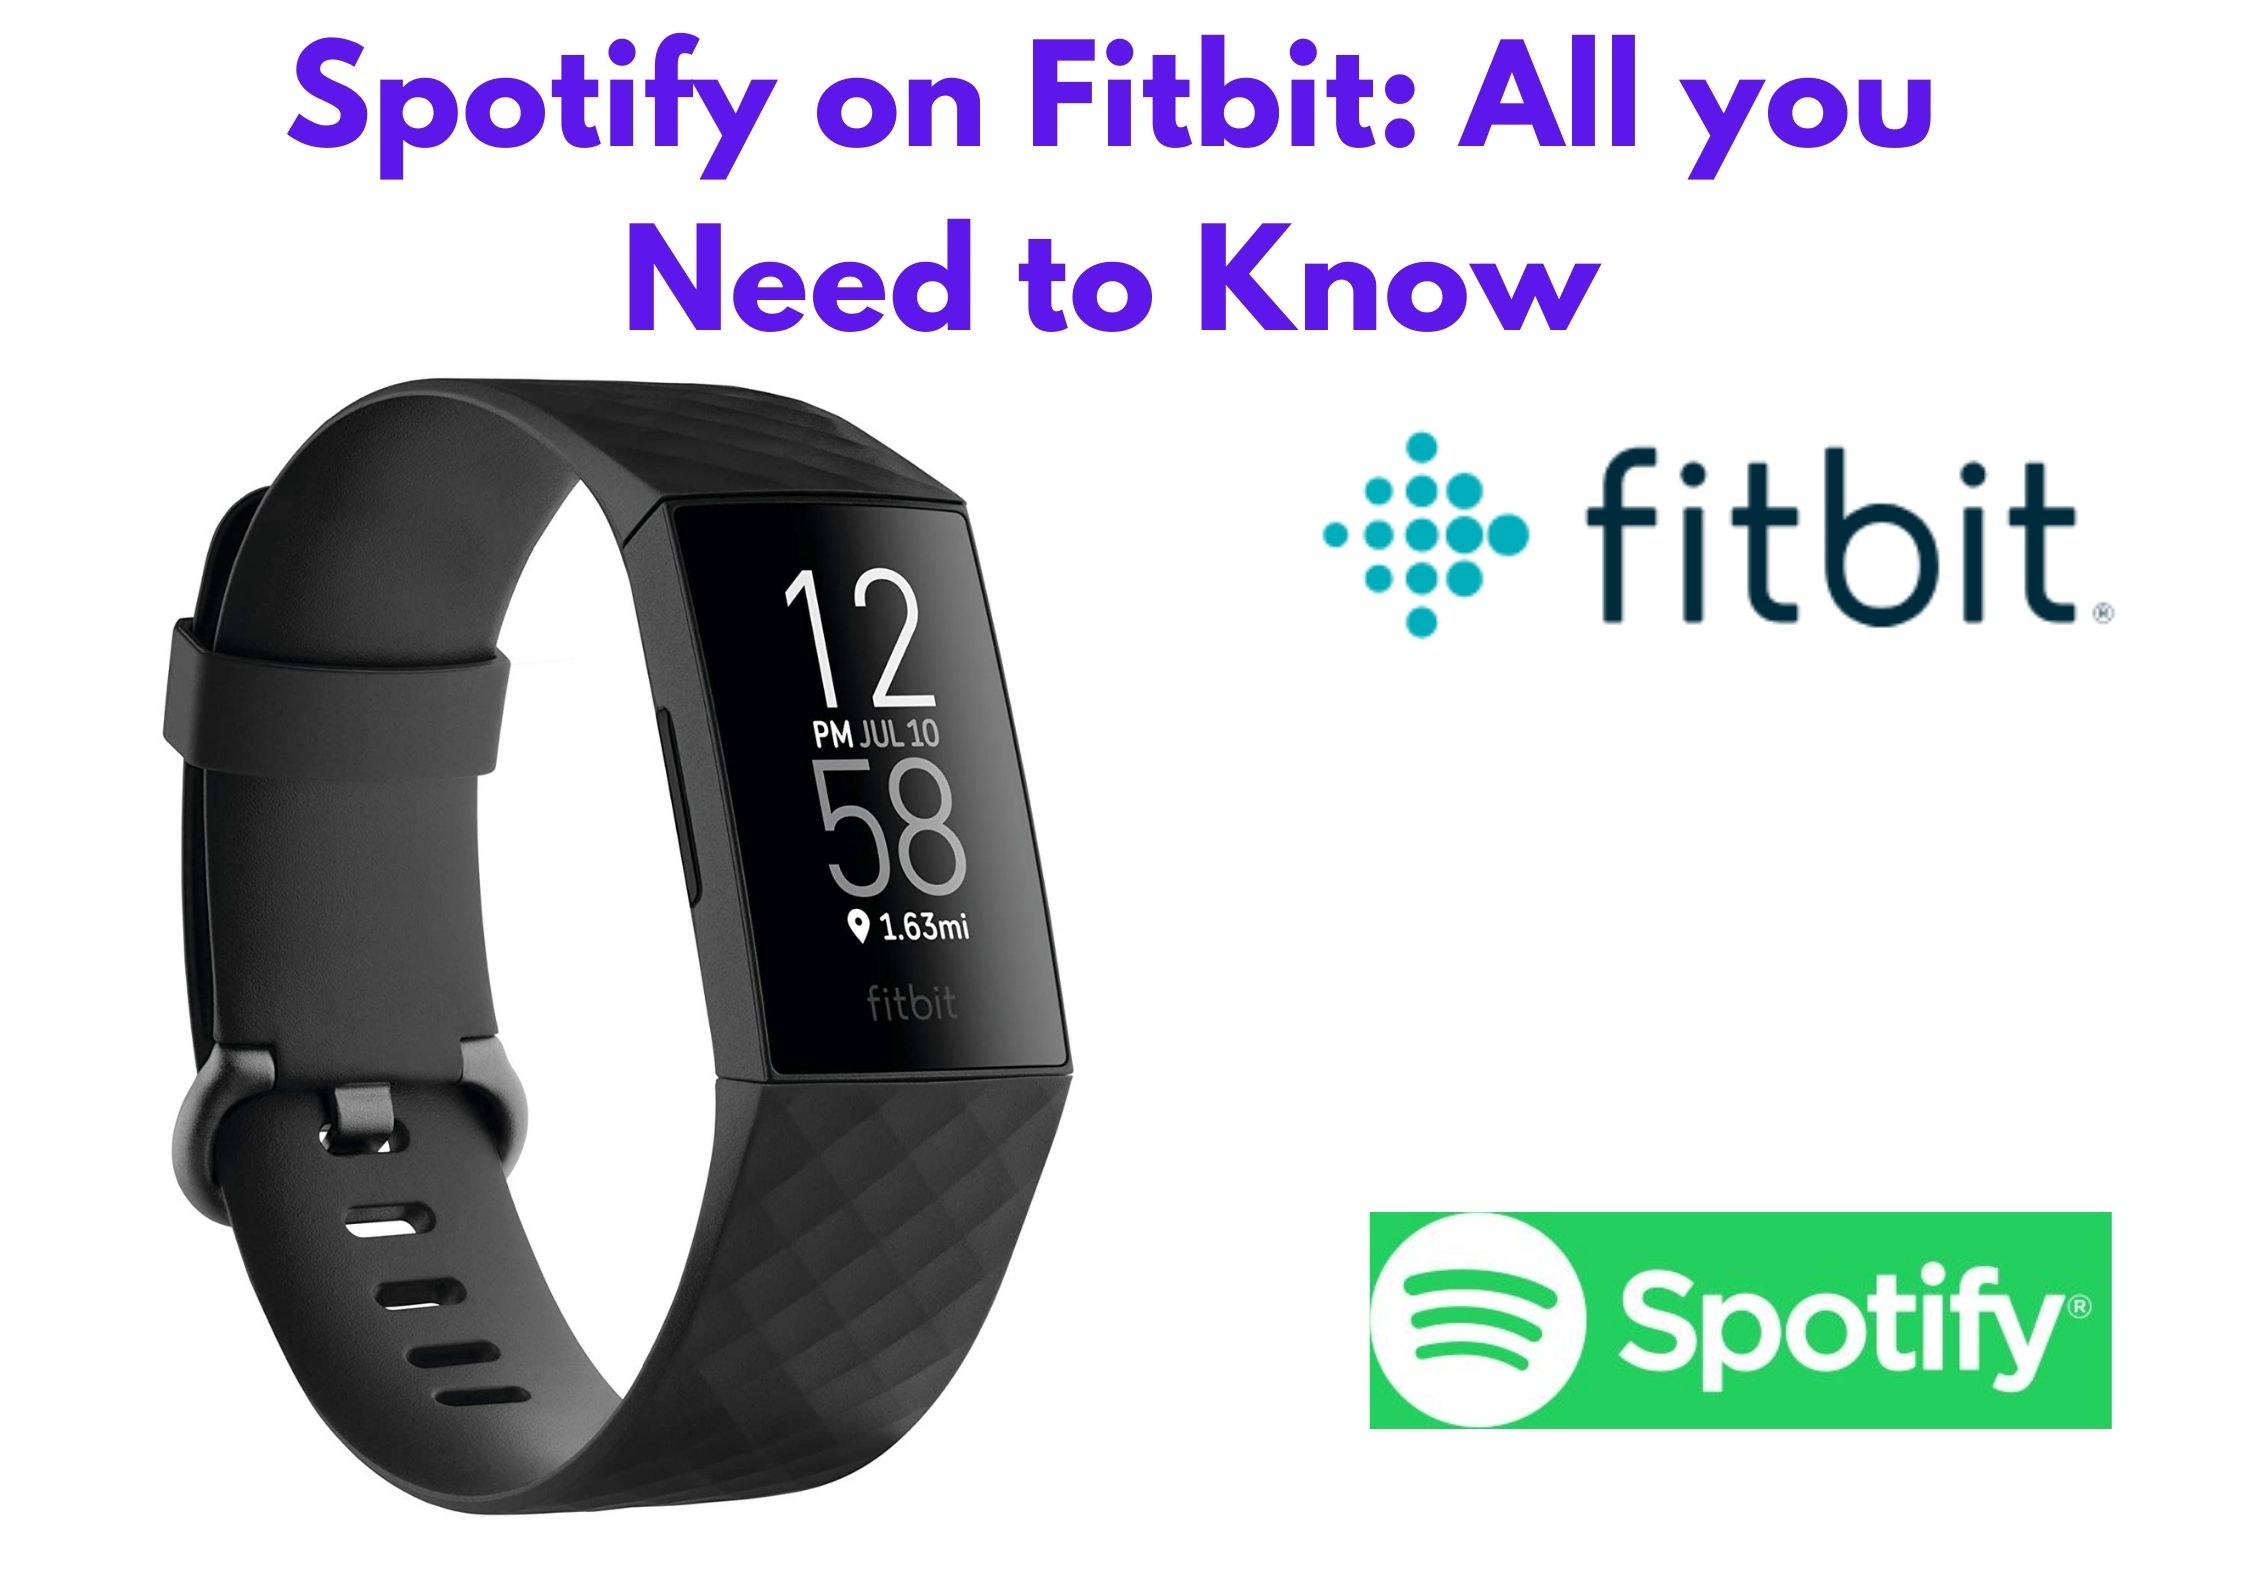 Spotify on Fitbit: Everything you Need to Know